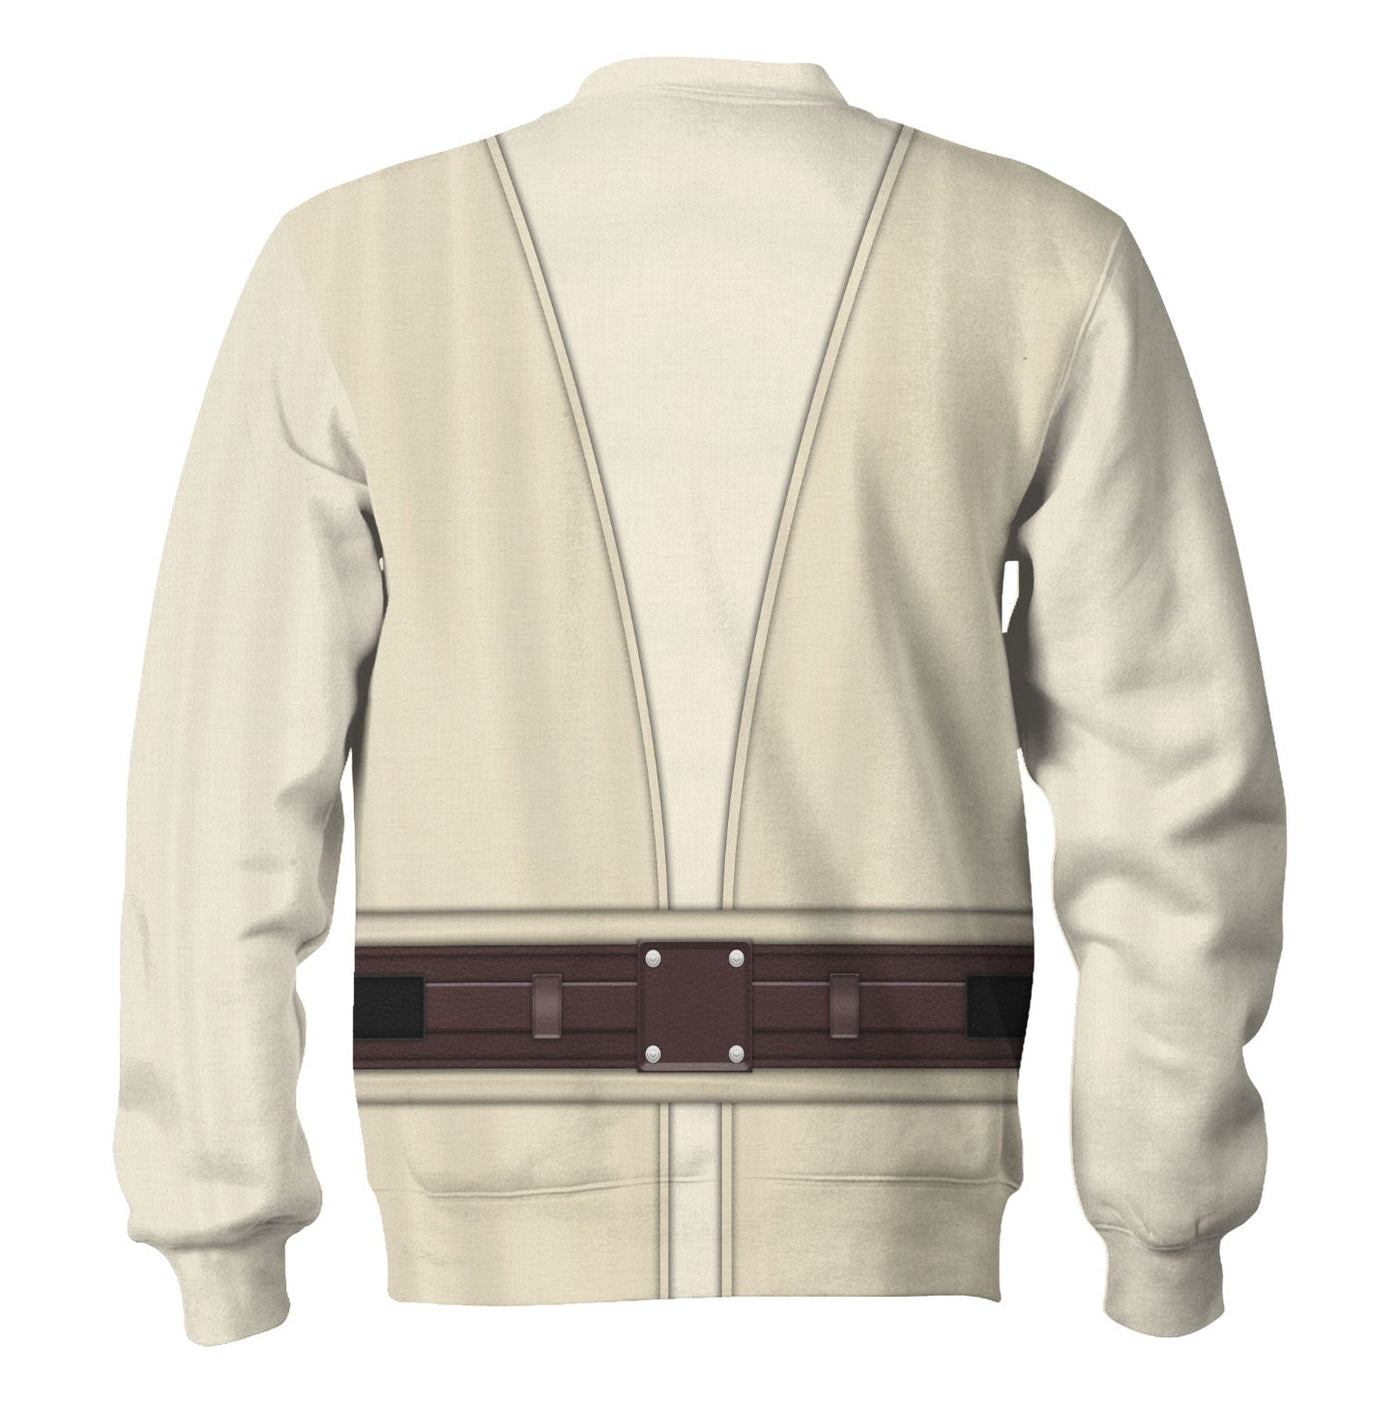 Star Wars Qui-Gon Jinn's Jedi Robes Costume - Sweater - Ugly Christmas Sweater